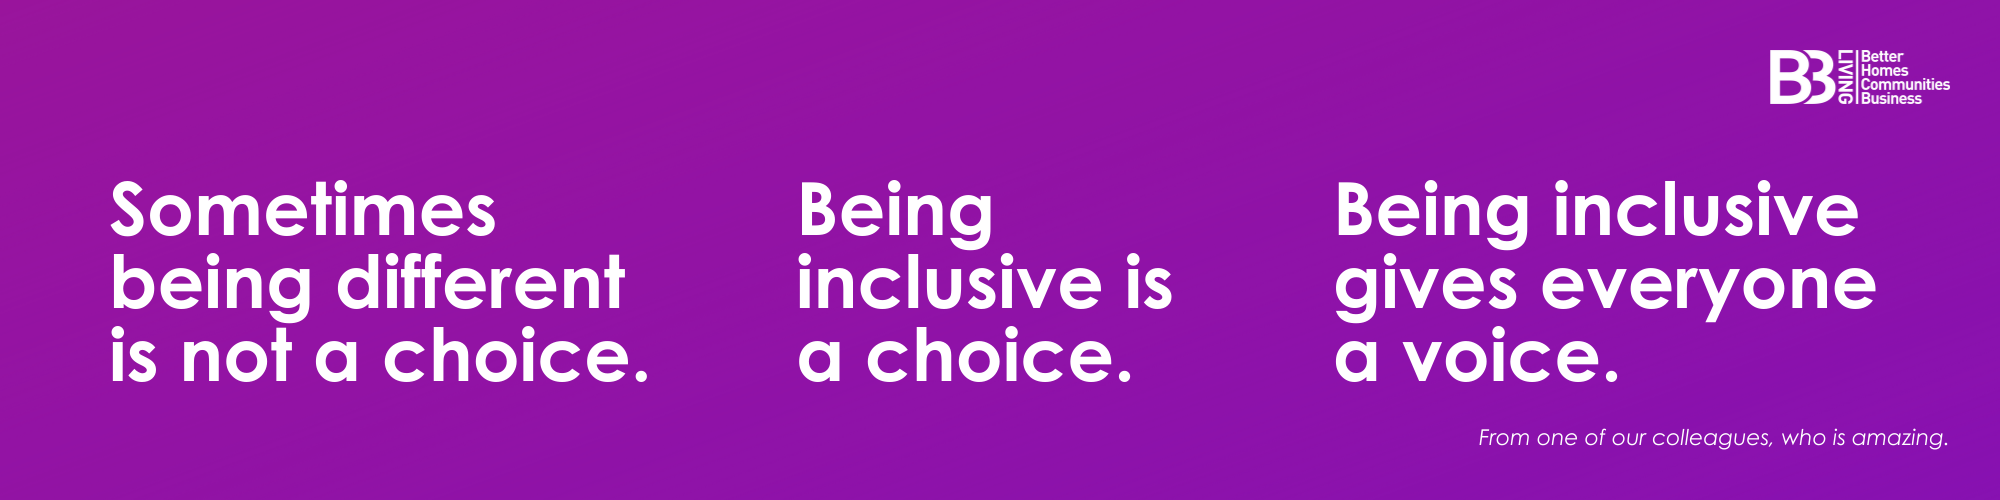 Image of a quote that reads "Sometimes being different is not a choice. Being inclusive is a choice. Being inclusive gives everyone a voice."